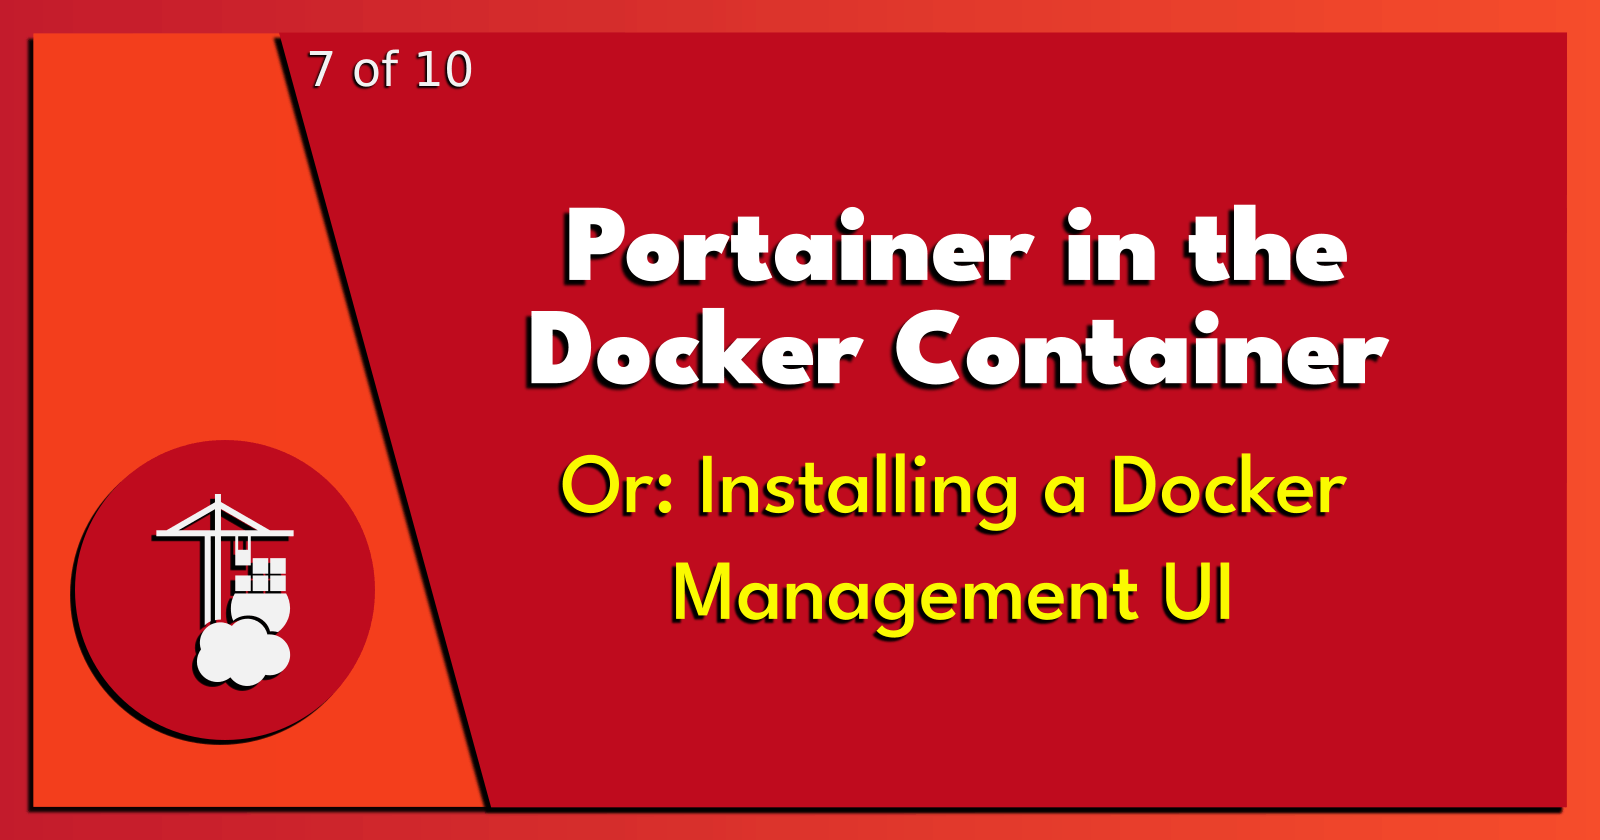 7 of 10: Portainer in the Docker Container.